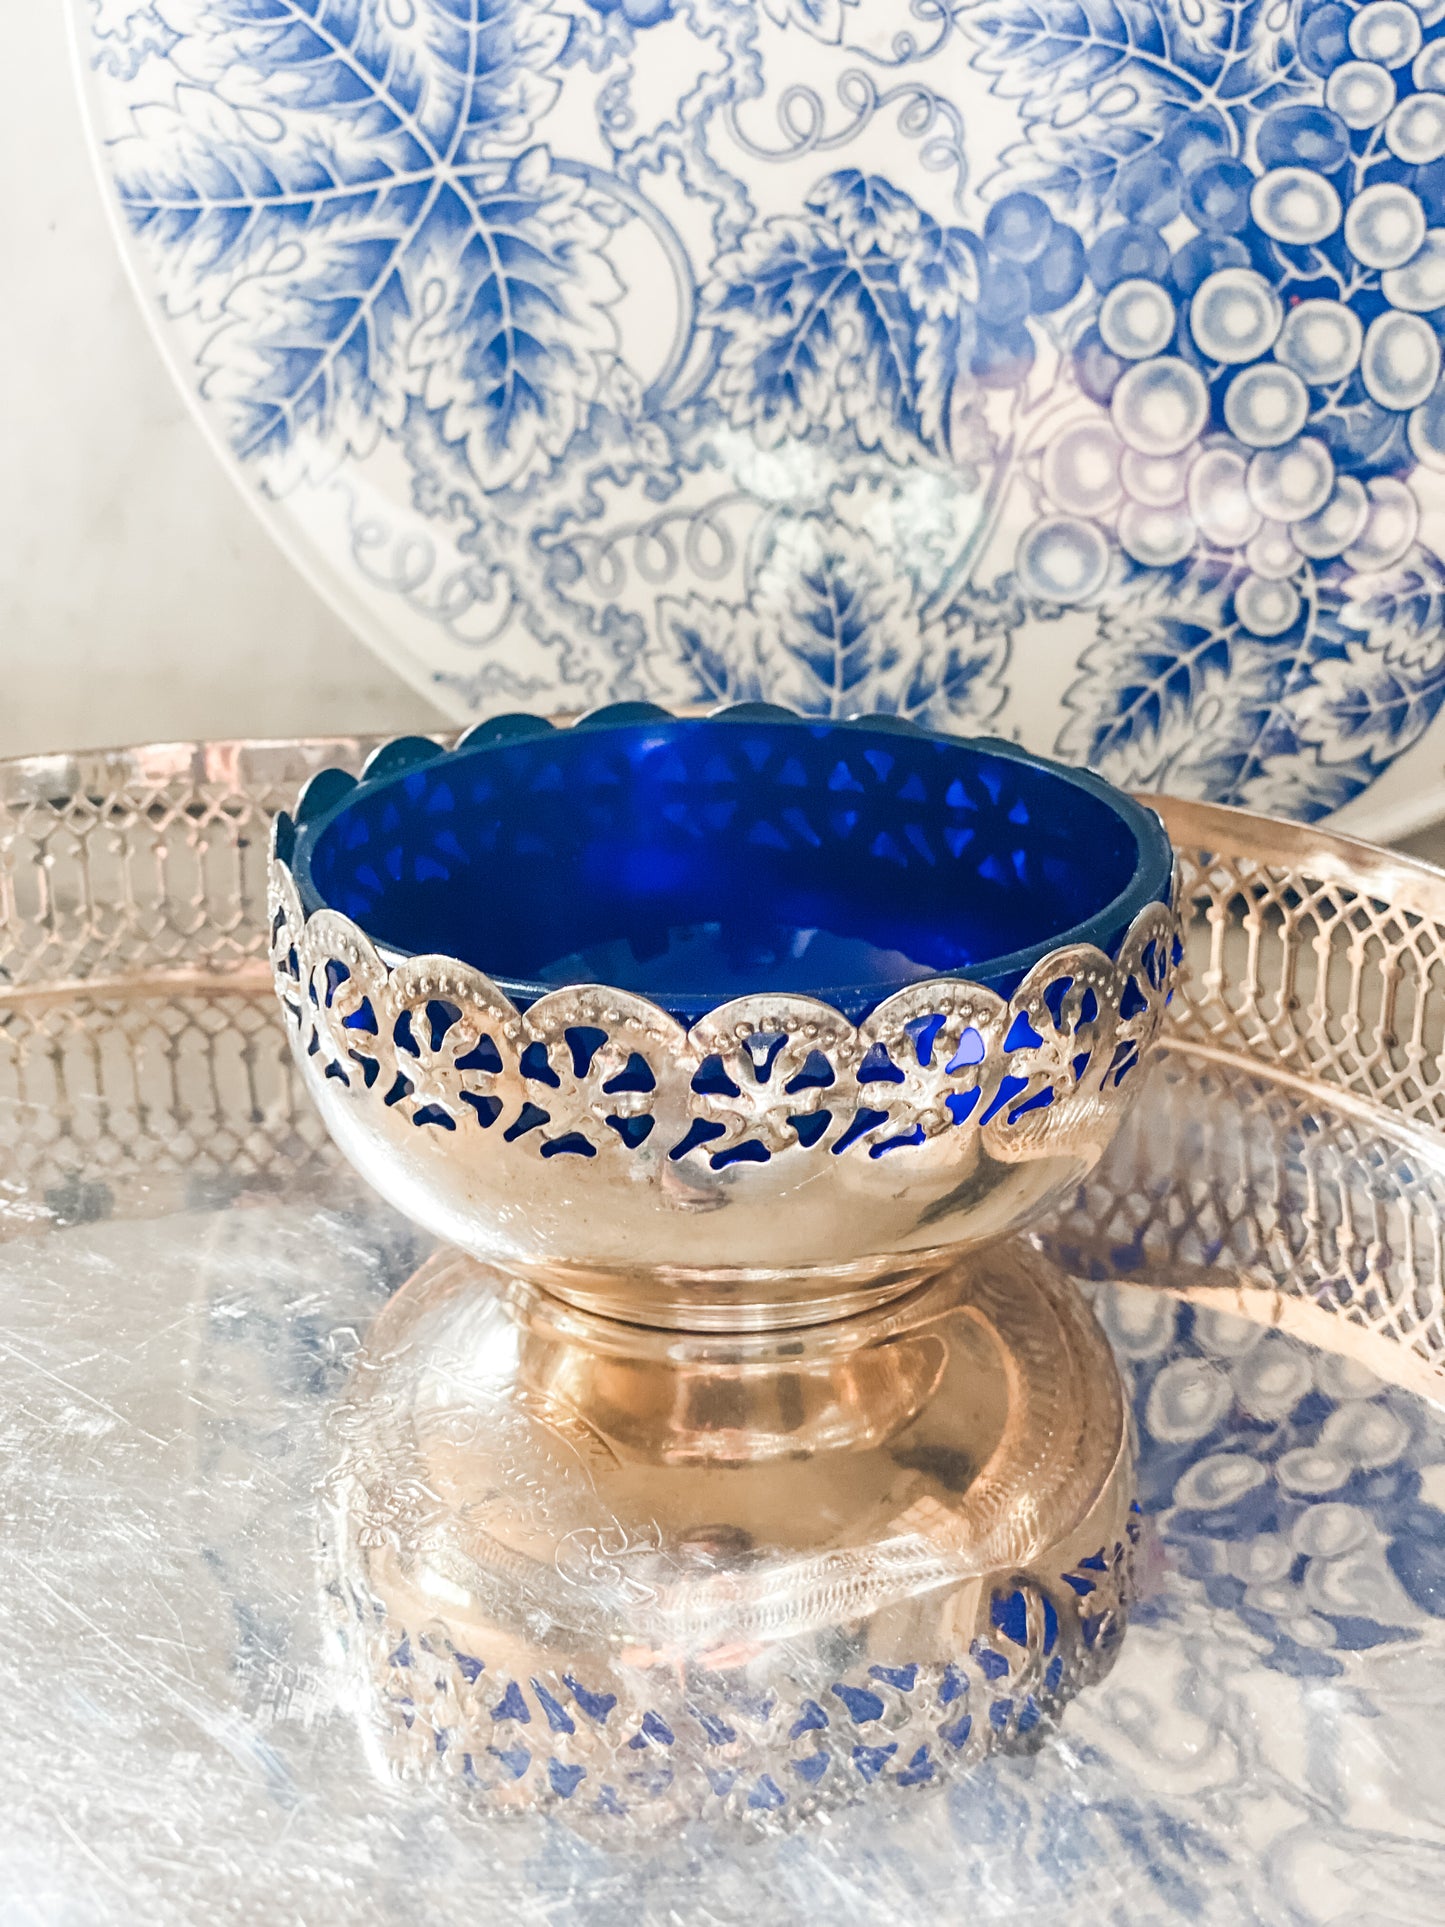 Striking Pierced Bowl with Blue Cobalt and Spoon